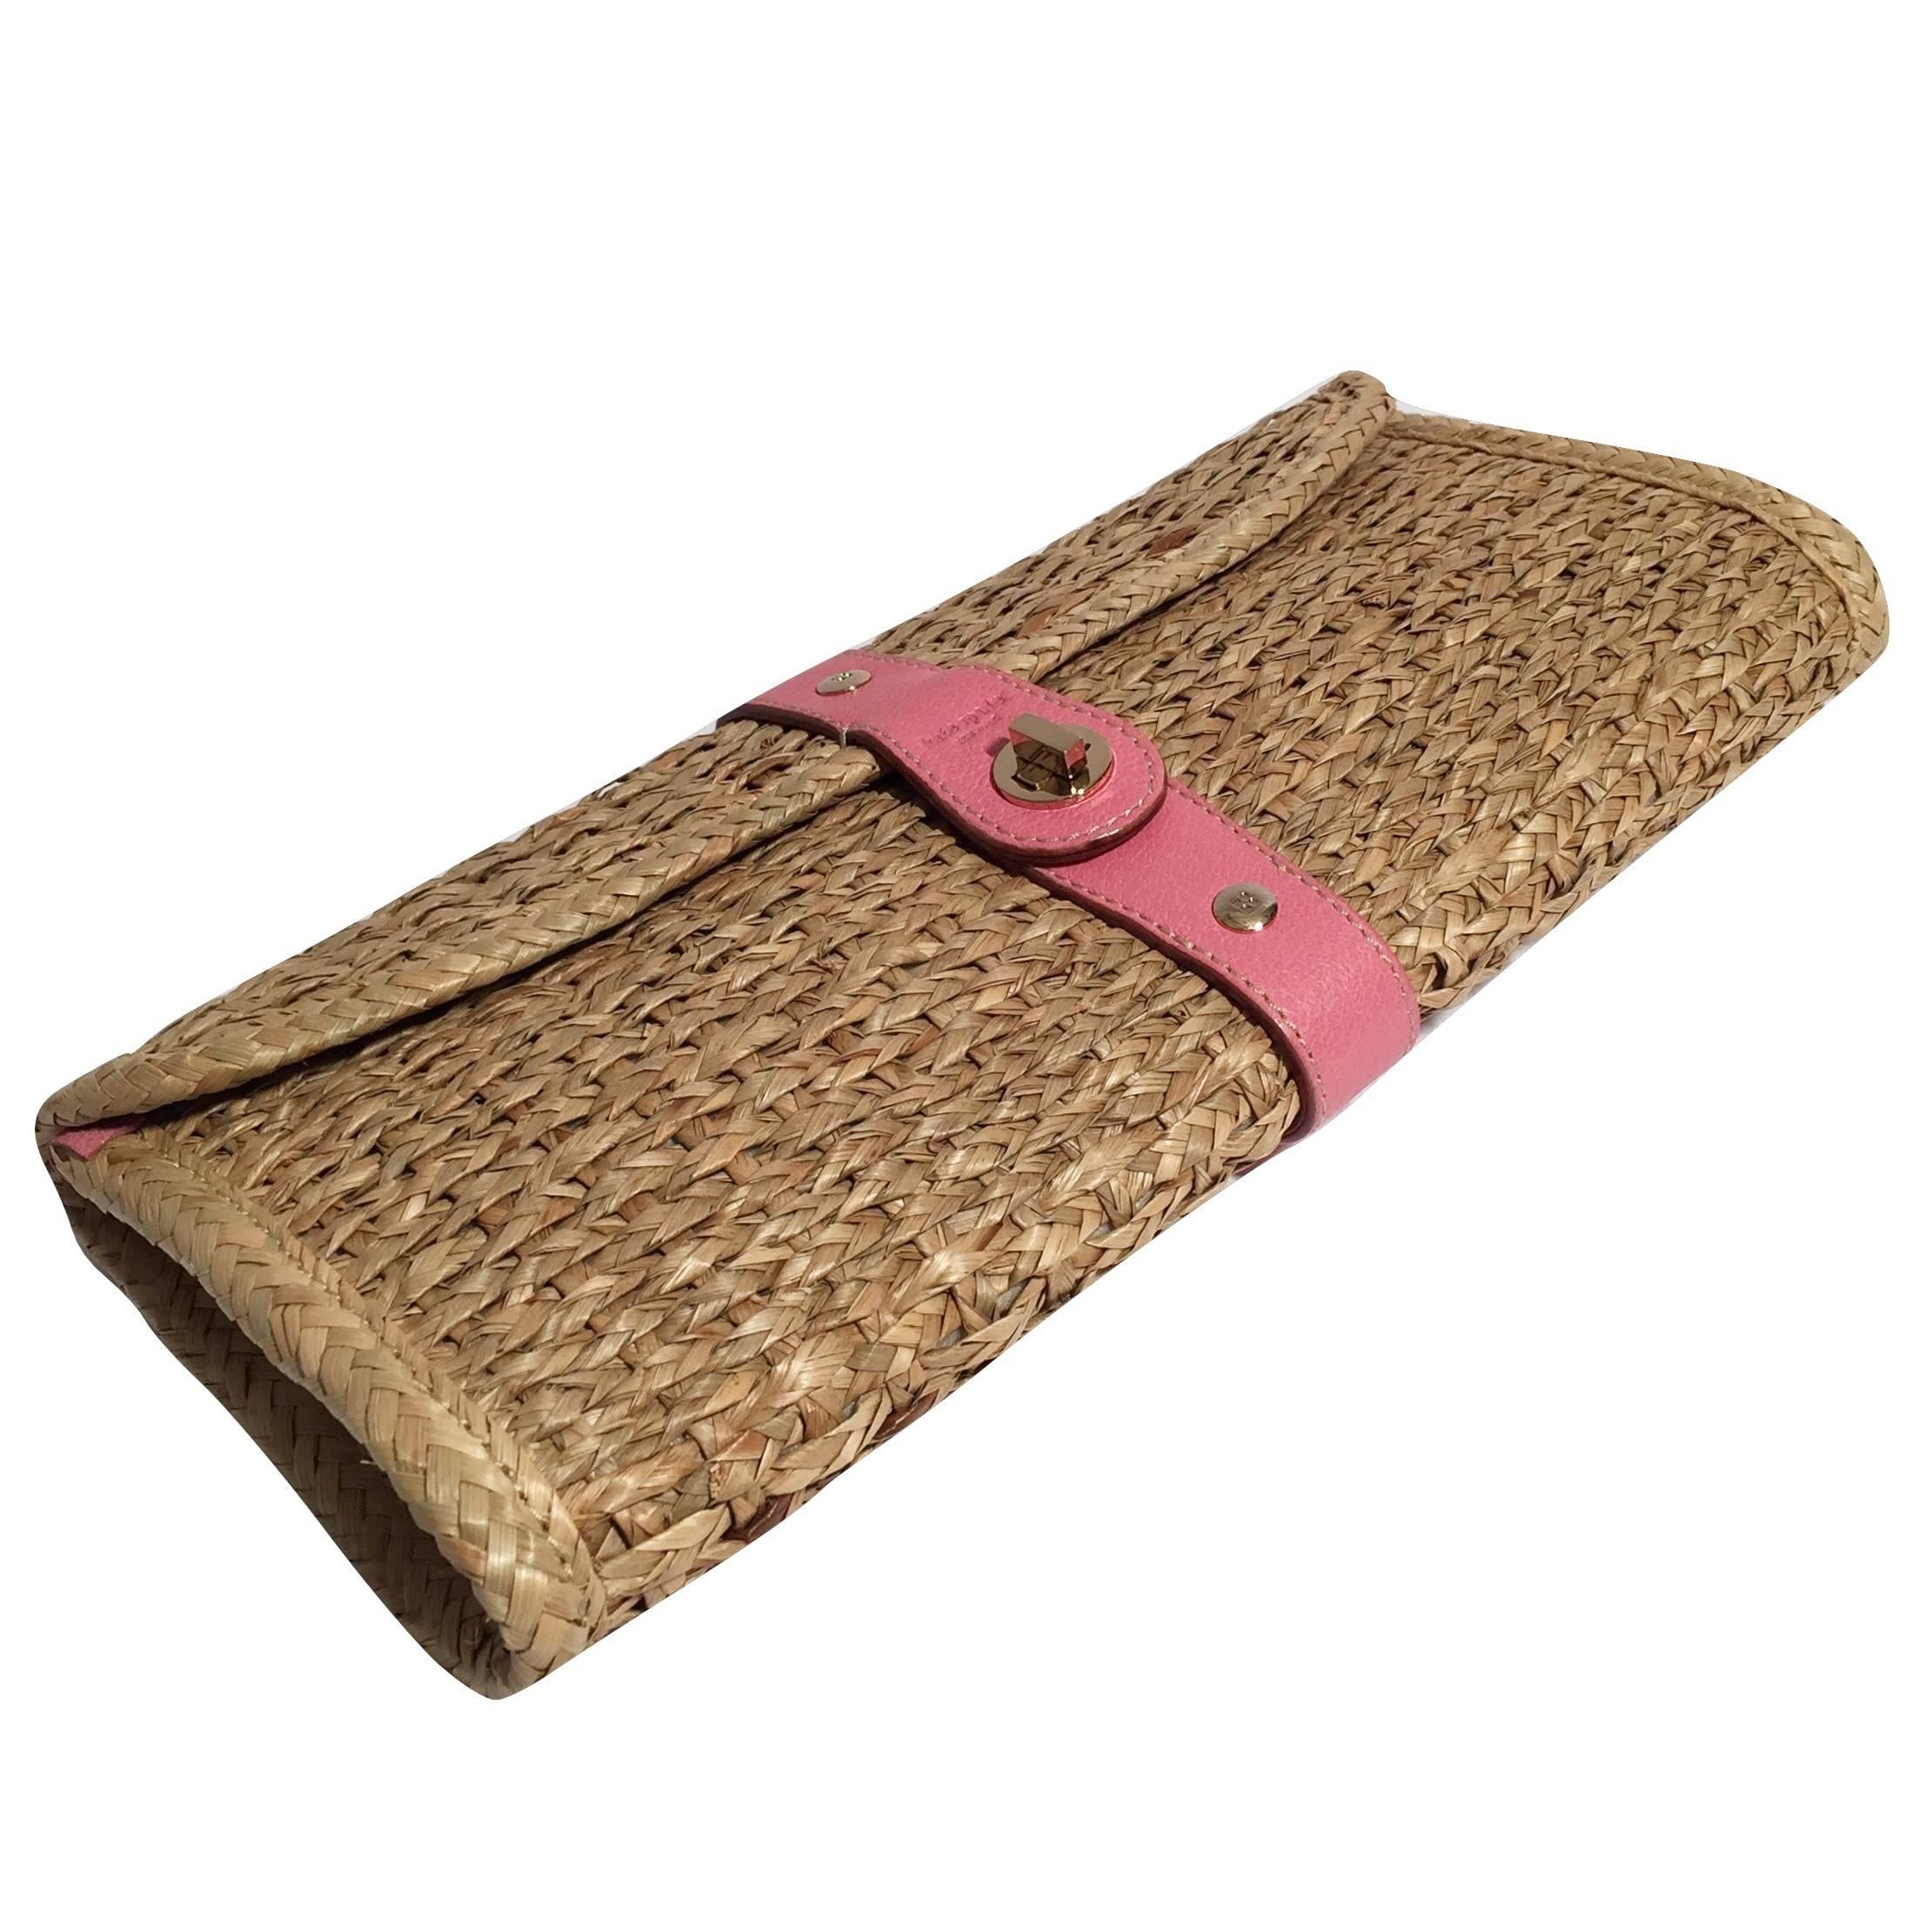 Women's New Spring 2005 Collection Kate Spade Wicker Straw Rattan Clutch Bag 